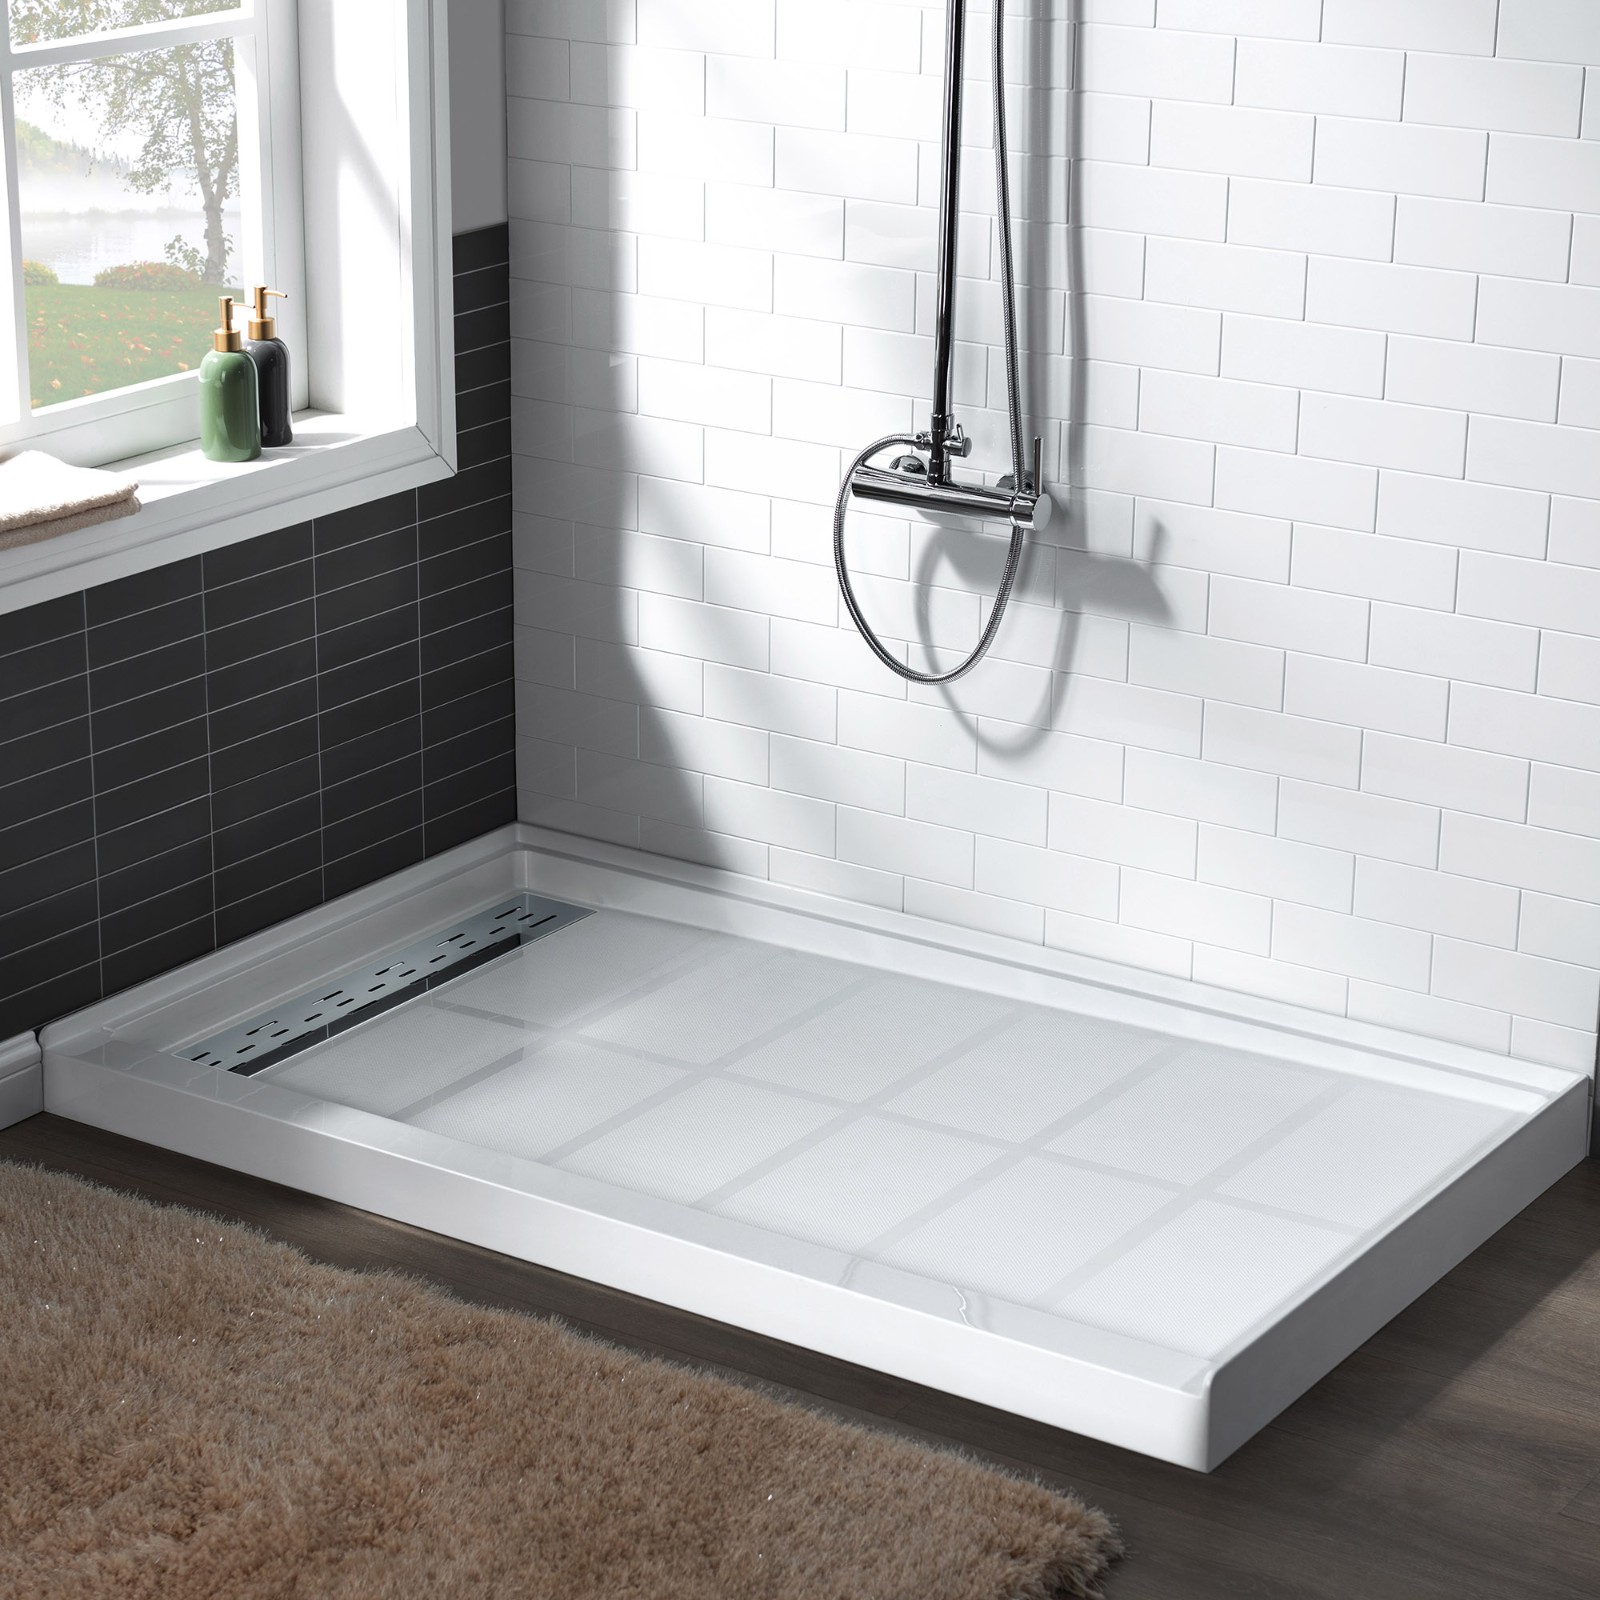  WOODBRIDGE SBR6034-1000L-CH SolidSurface Shower Base with Recessed Trench Side Including  Chrome Linear Cover, 60